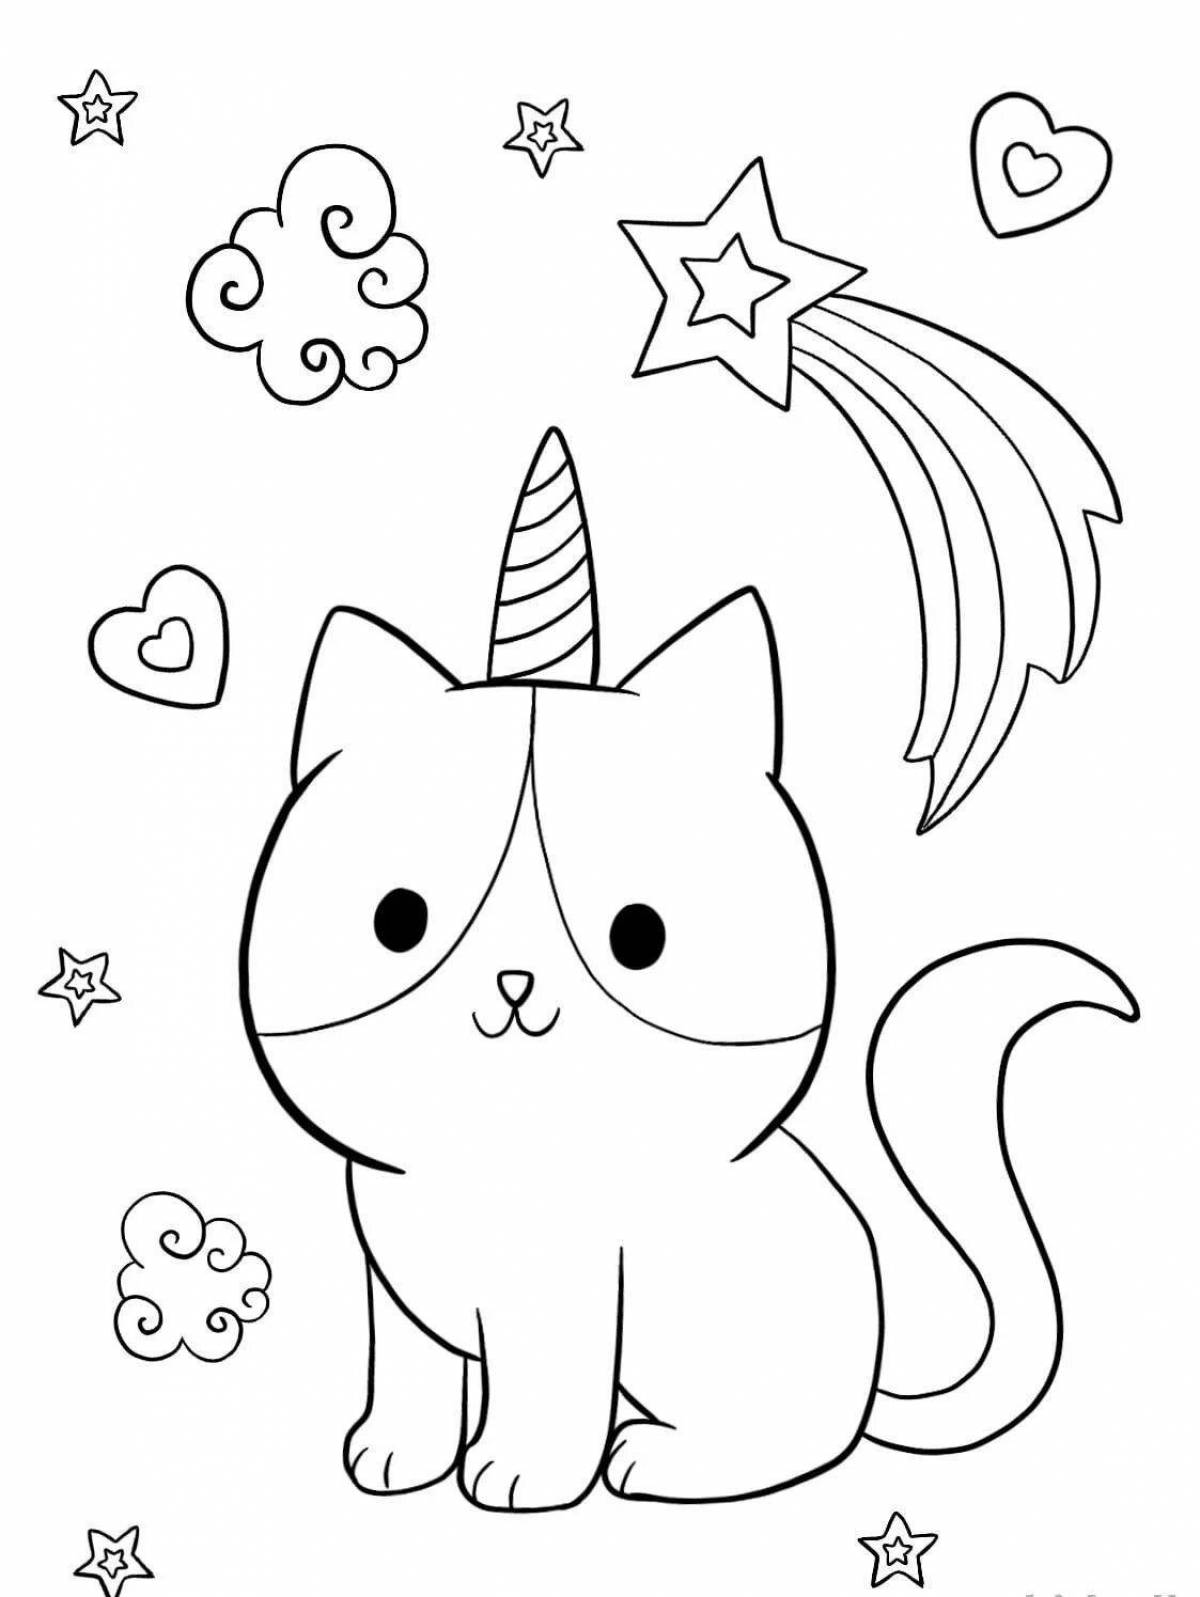 Charming unicorn pussy coloring book